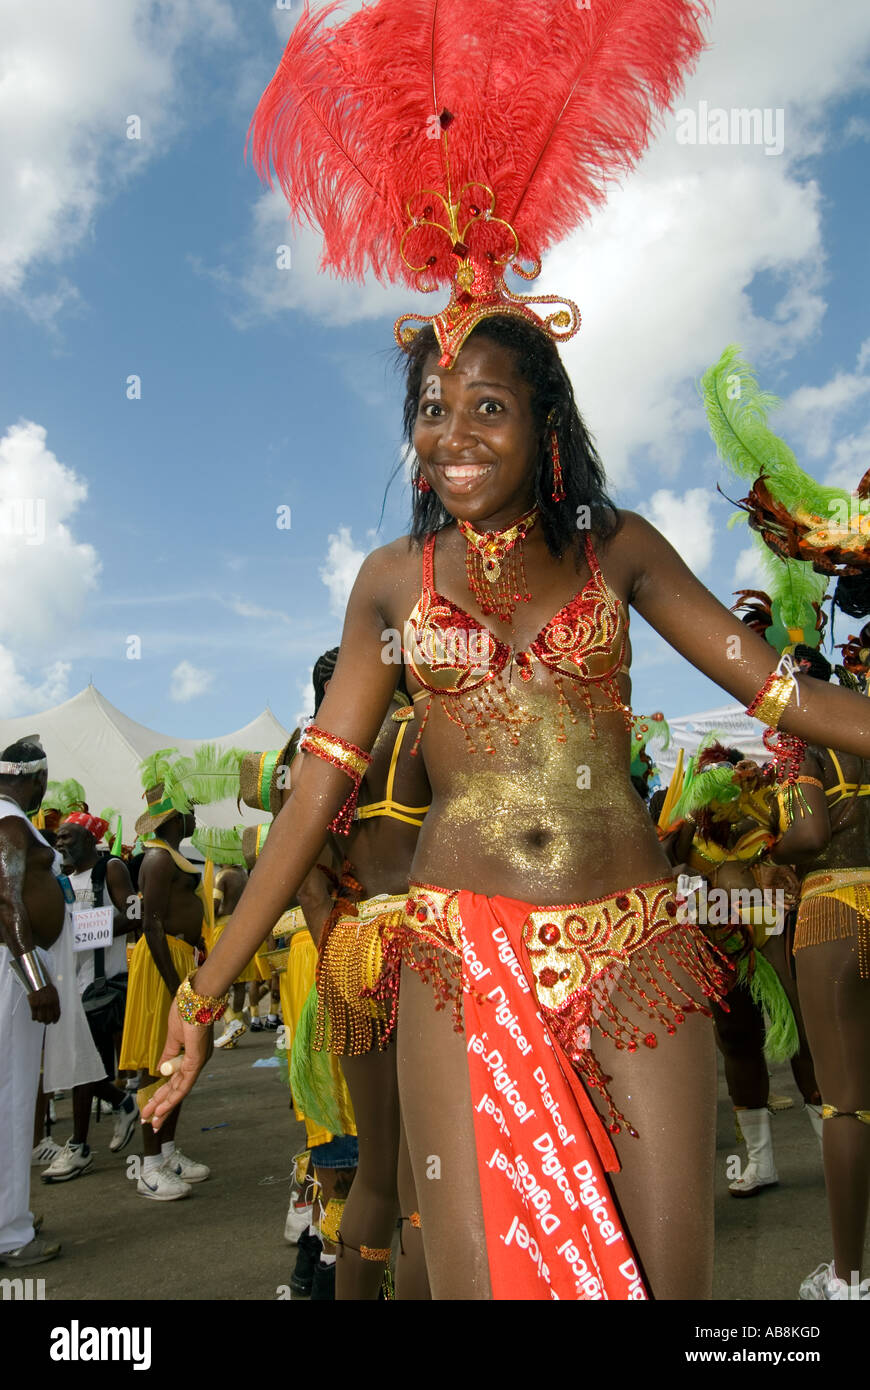 West Indies Trinidad Port of Spain Carnival 2006 Portrait of smiling dancer in colorful costume Parade of Bands Queens Park Stock Photo